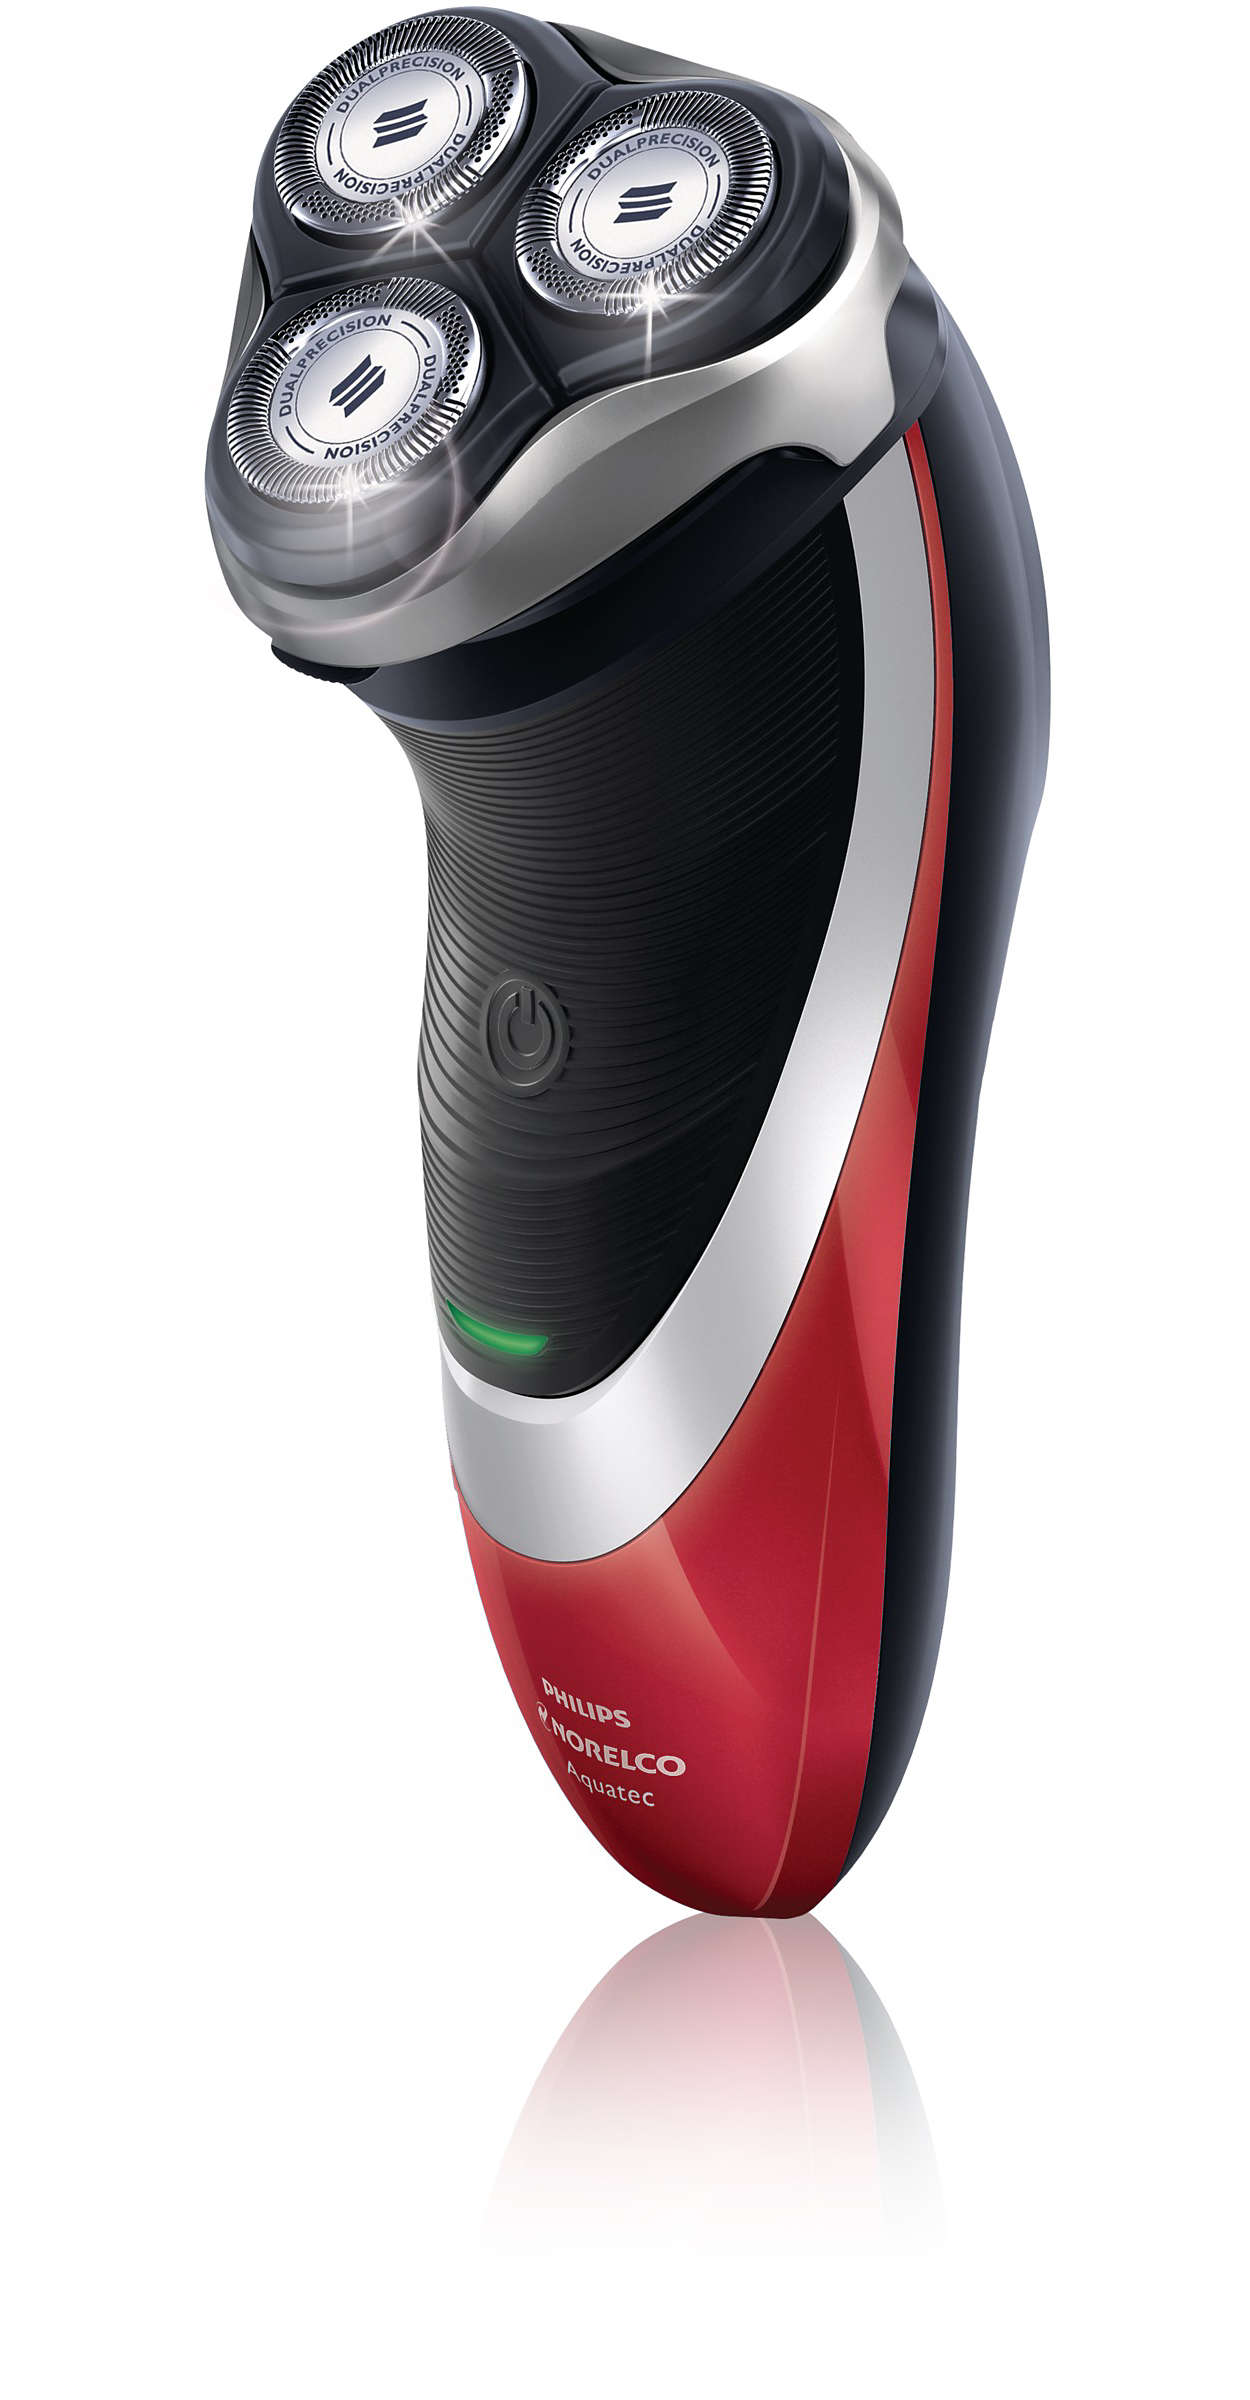 norelco 4200 electric shavers